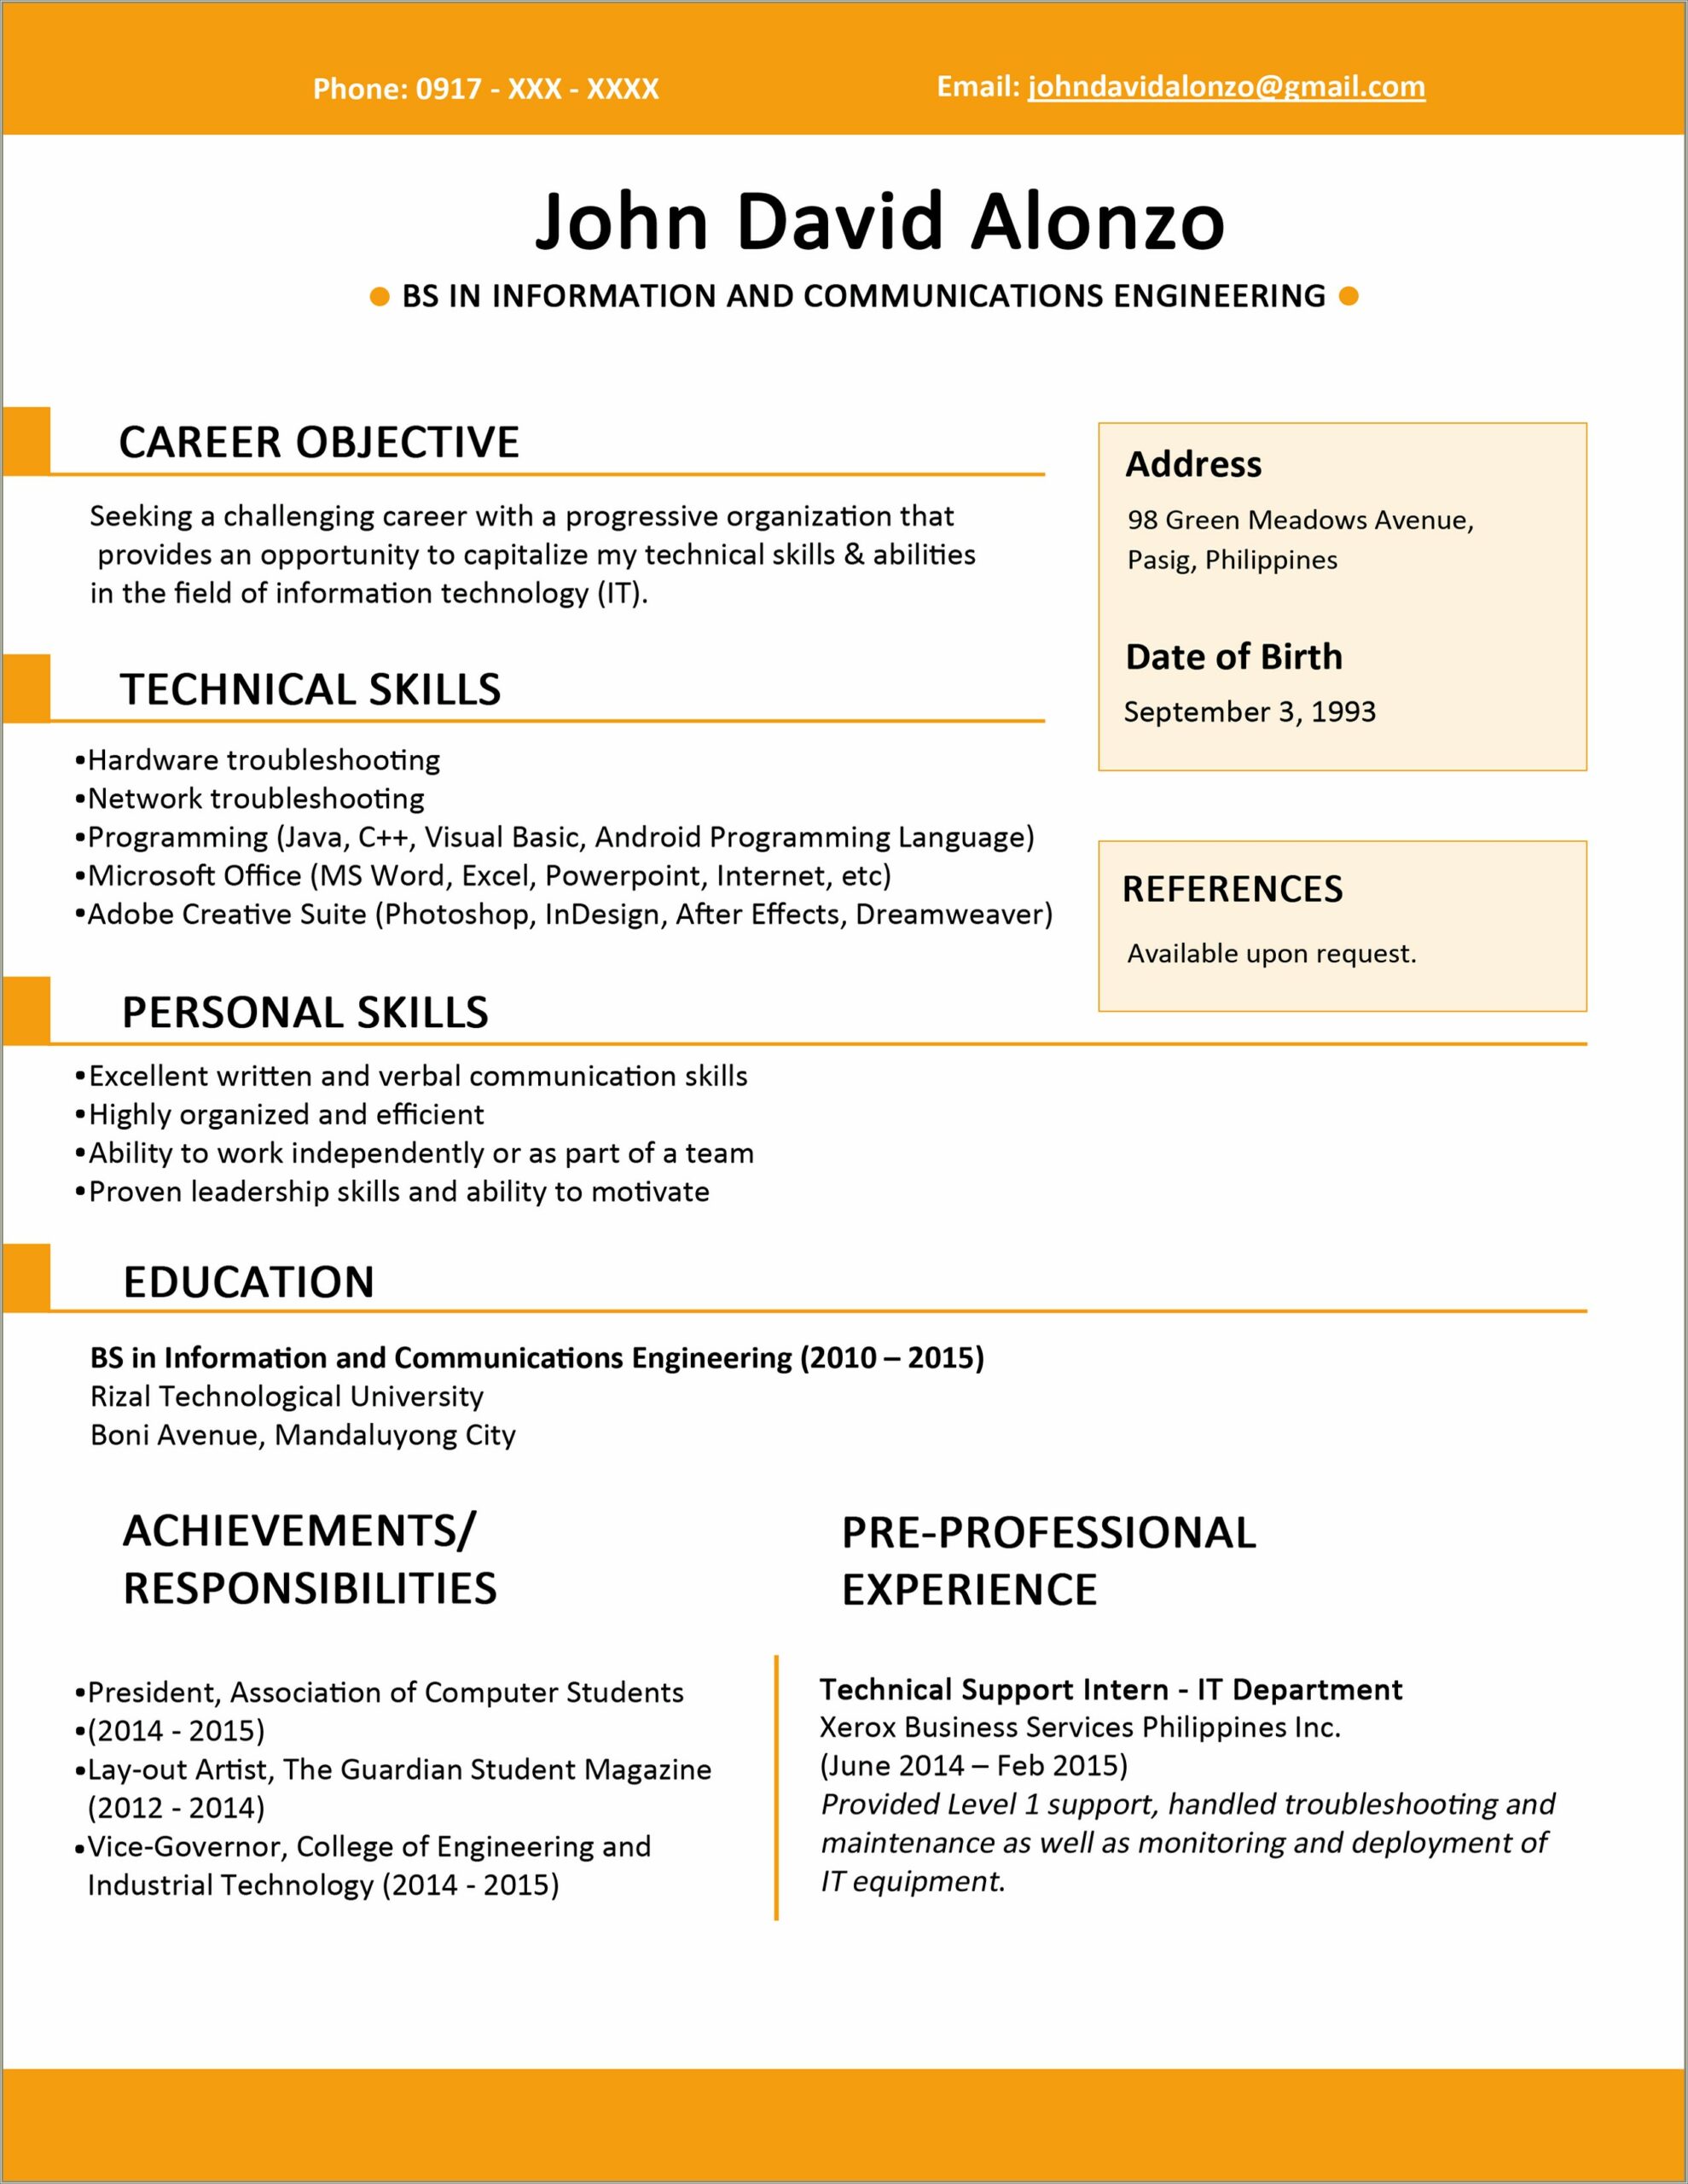 Resume Sample For Fresh Graduate Without Experience Download